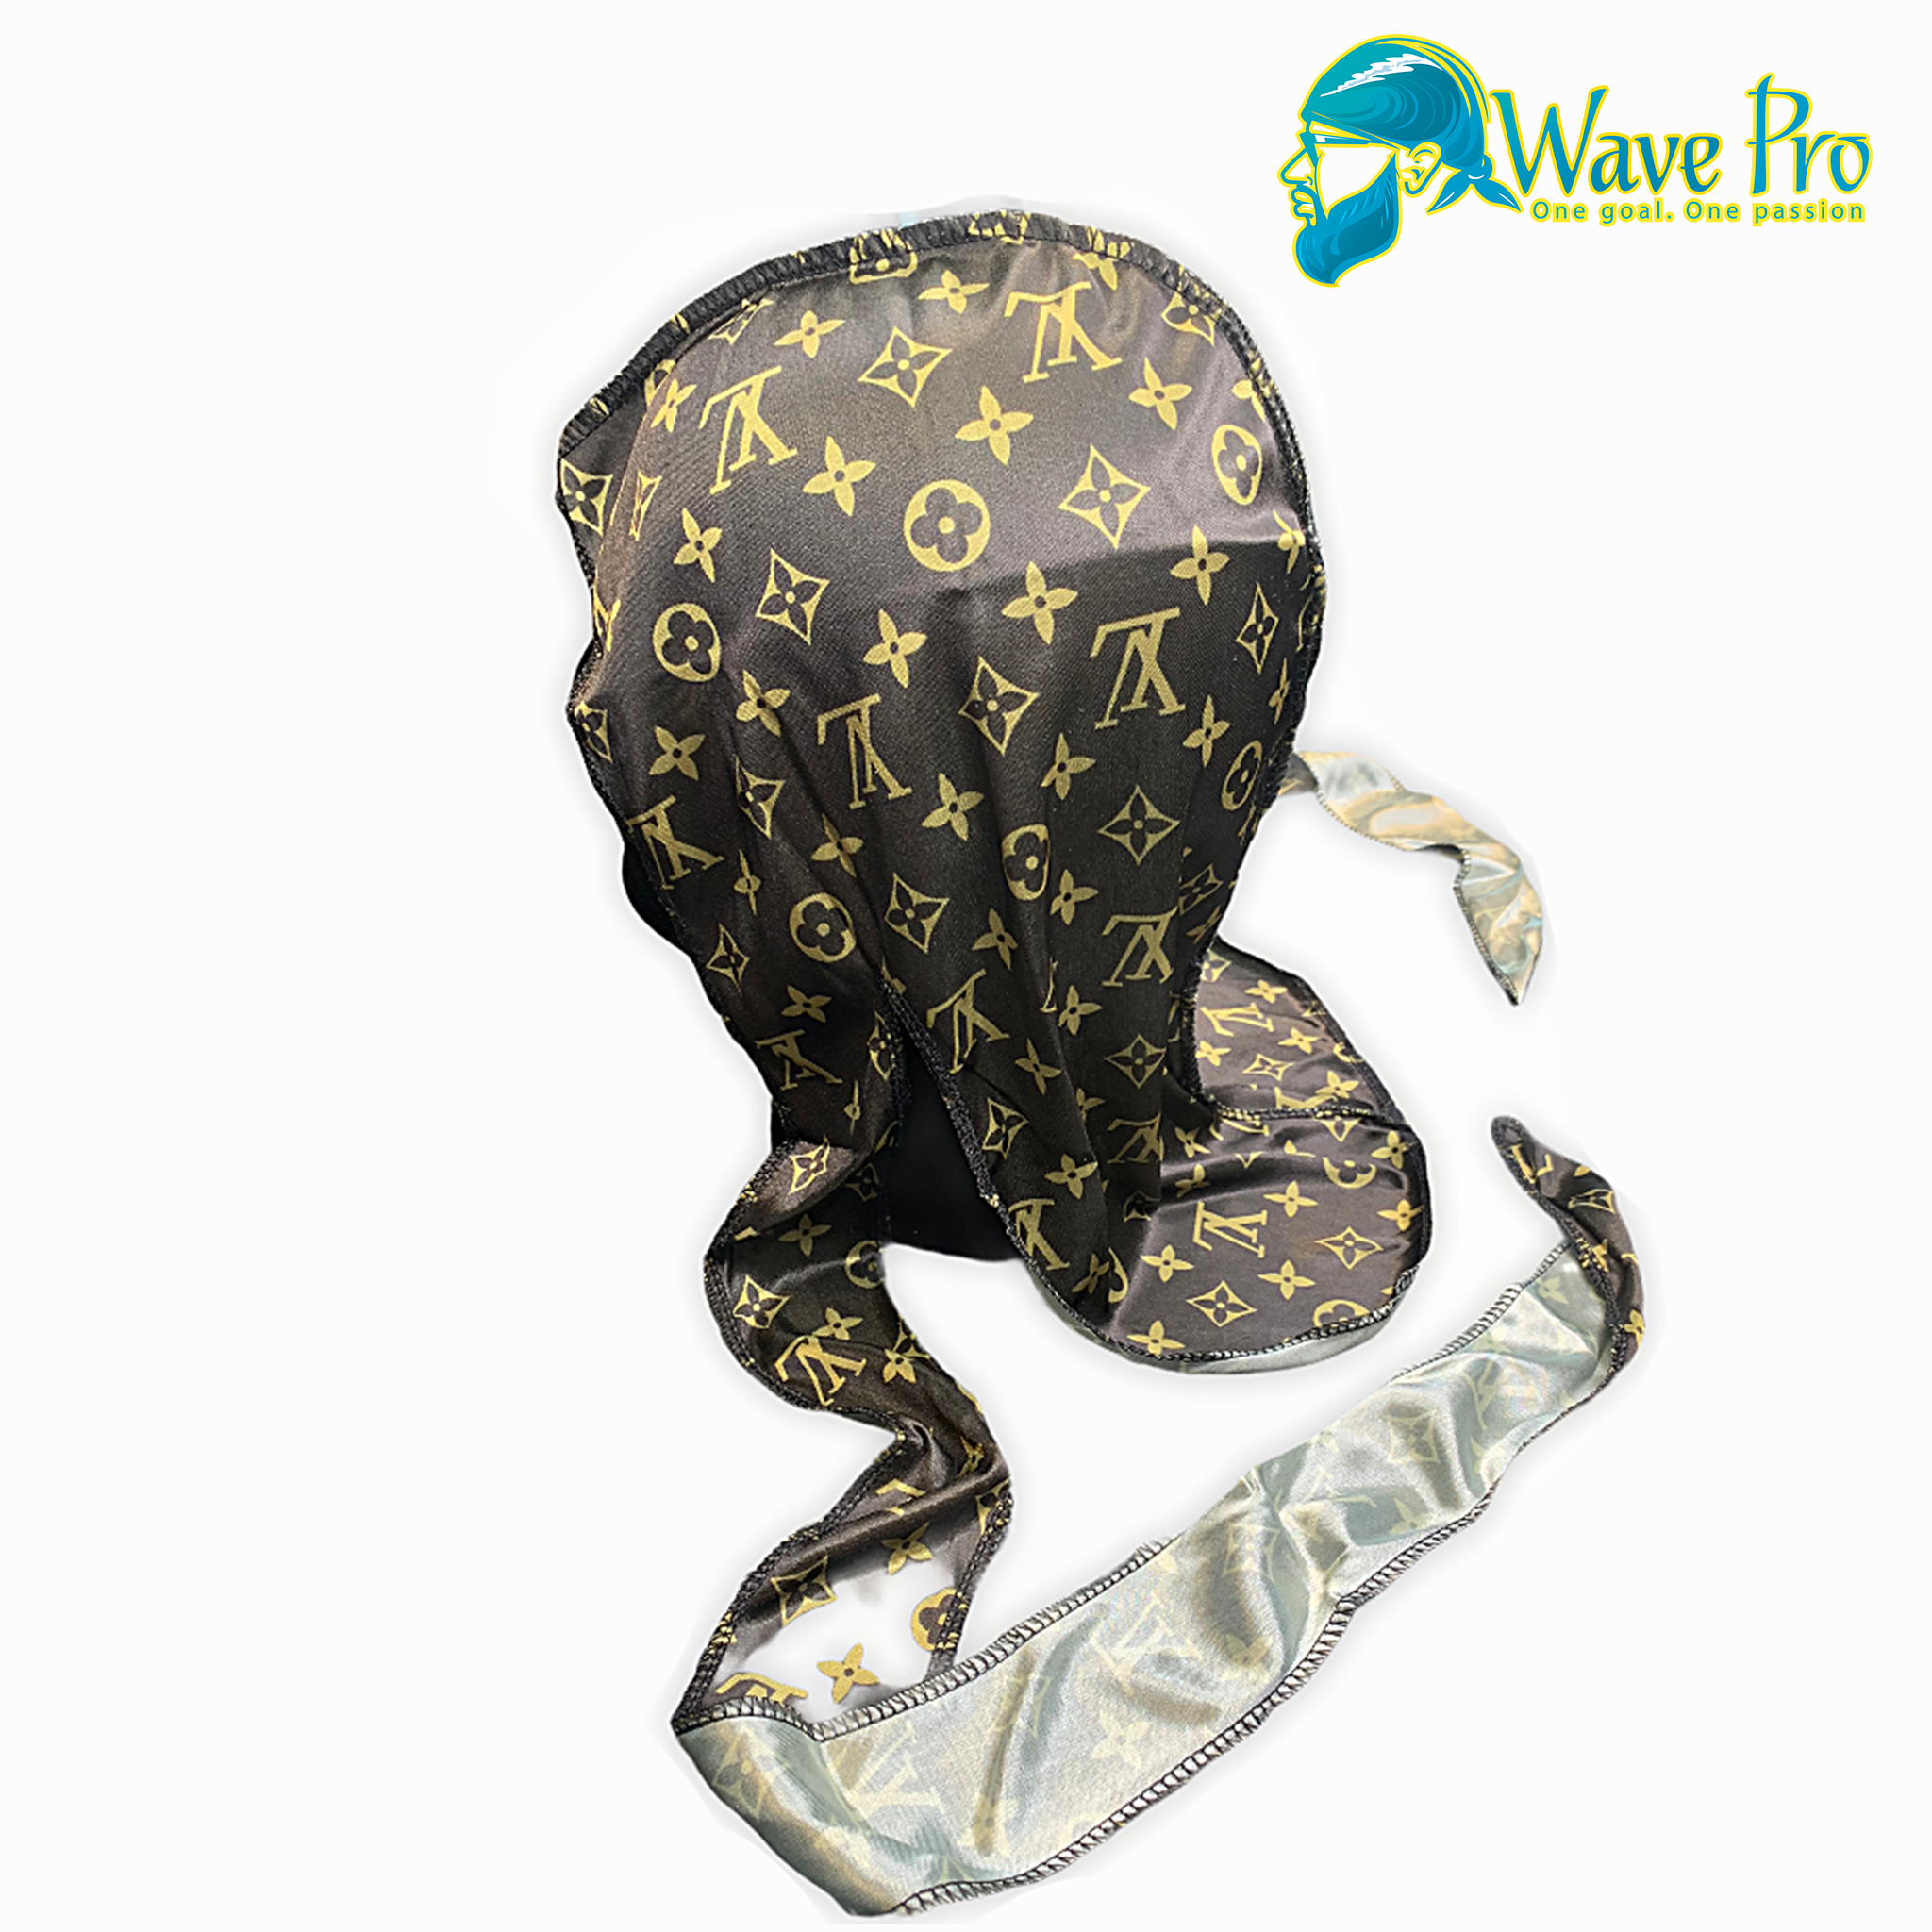 Durag Wave - LV x #Supreme durags available for shipping today on